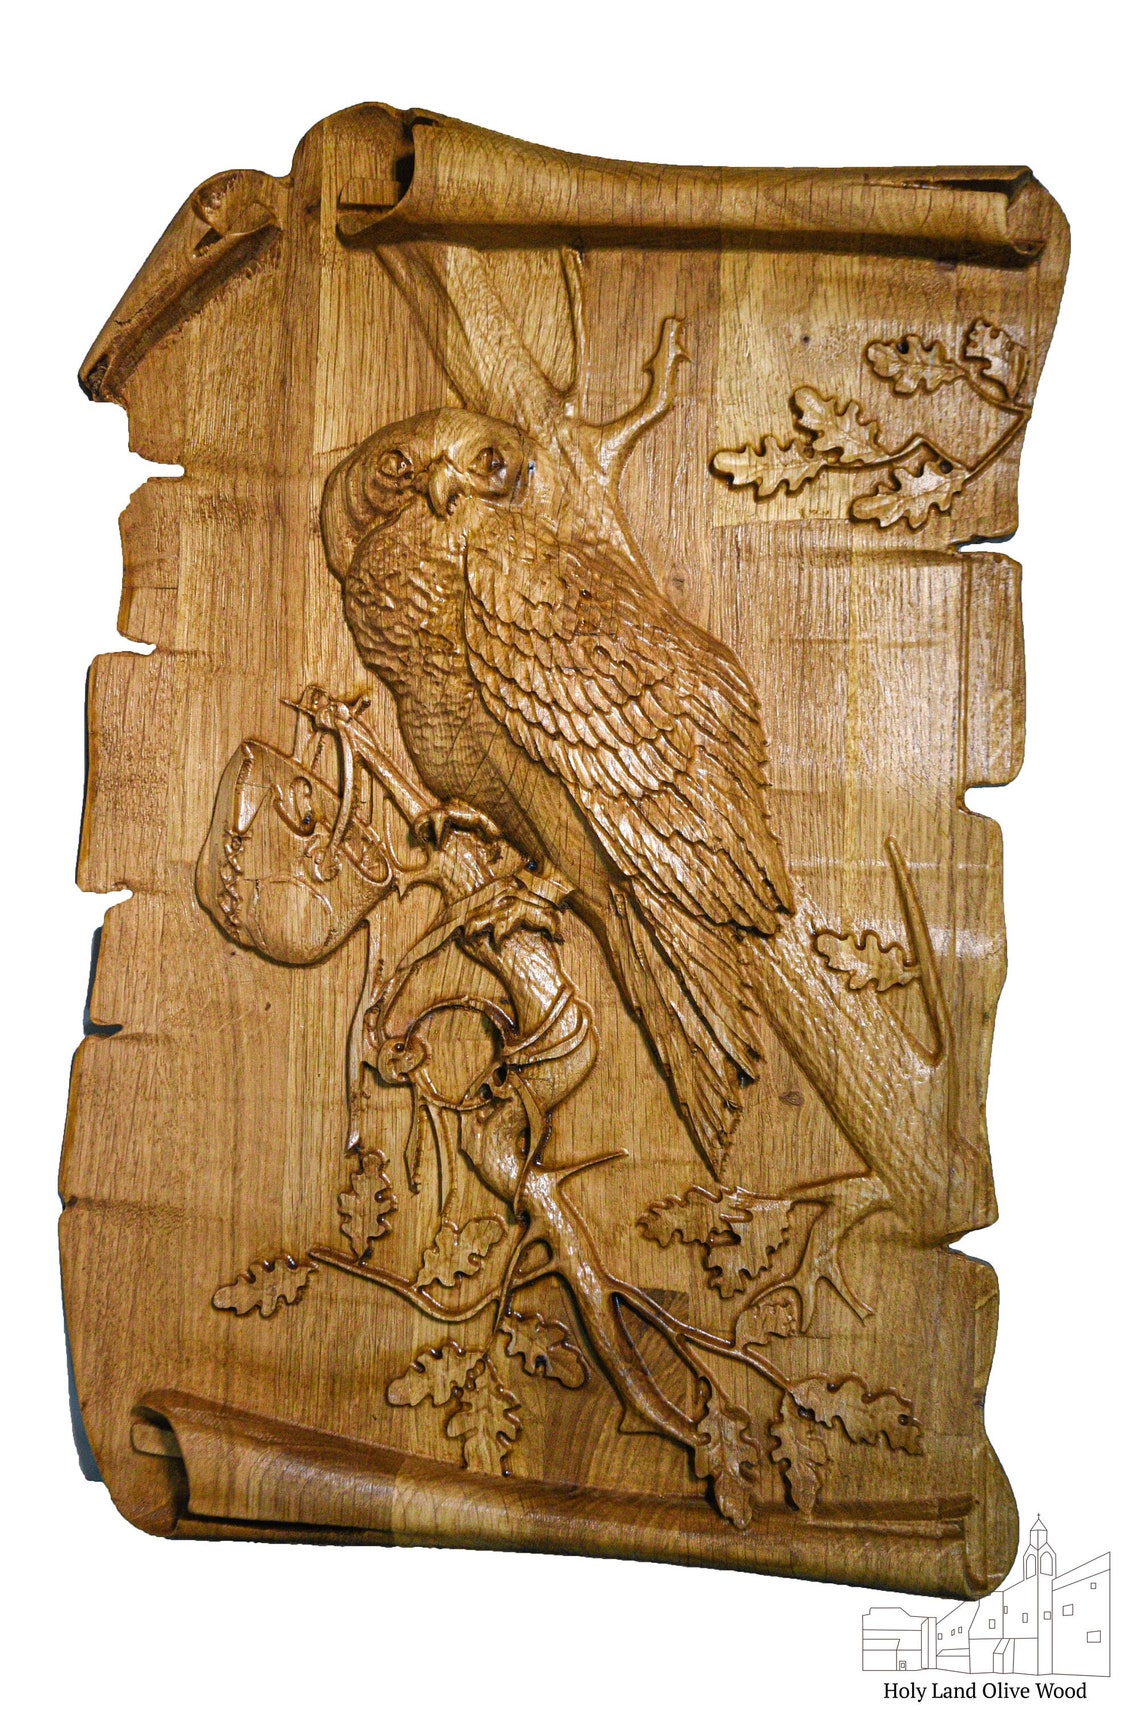 Owl Wood Carving Home Decor Made of Oak Wood Nice Gift - Etsy